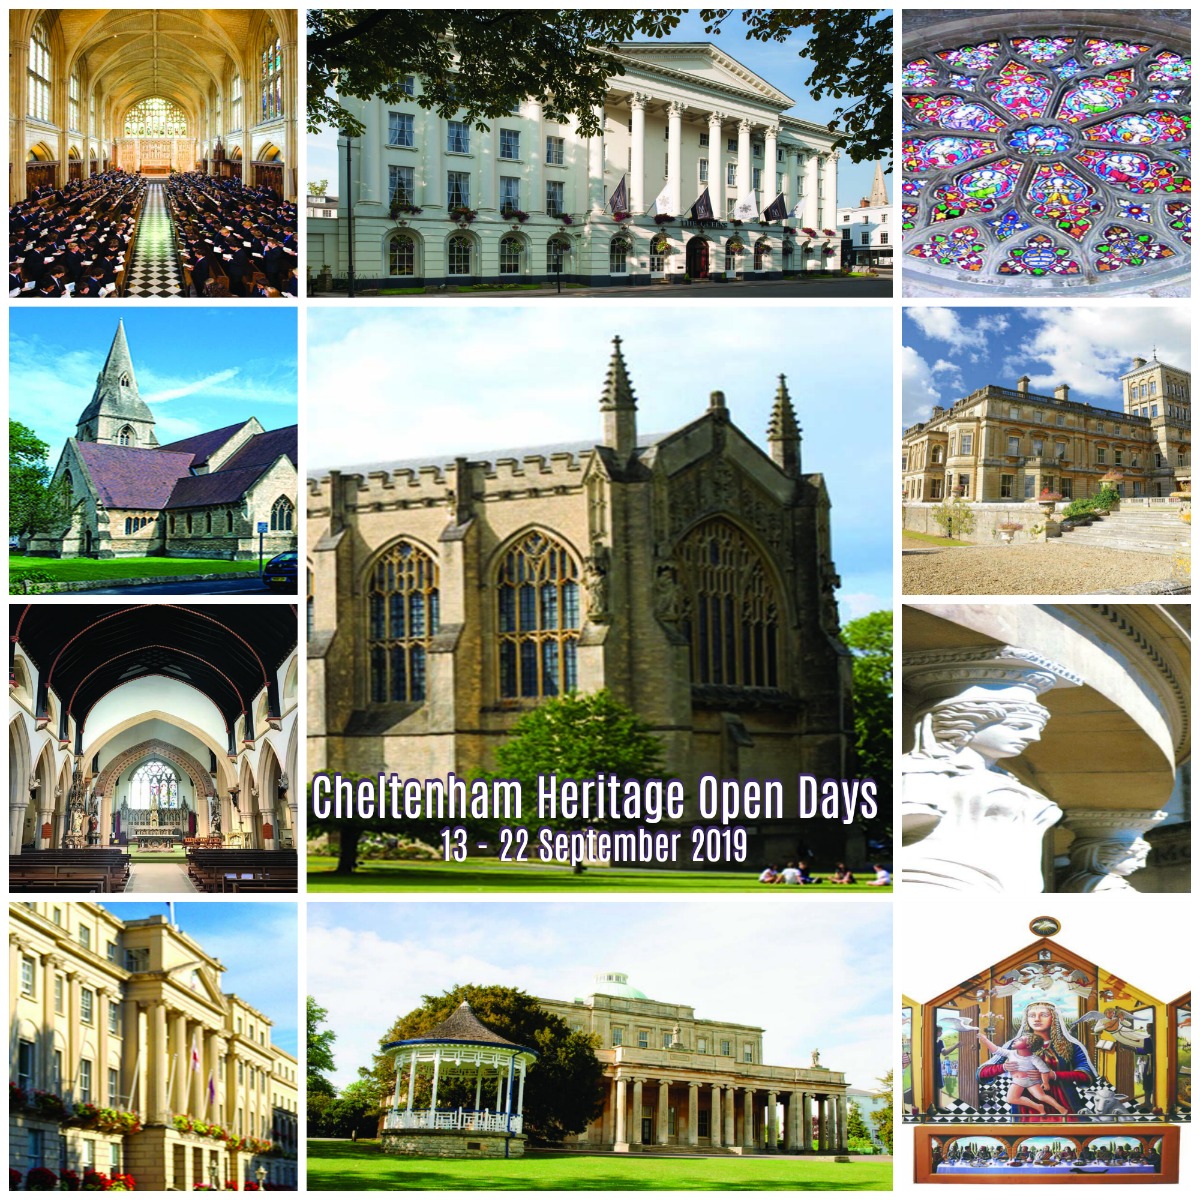 Heritage Open Days promotional poster